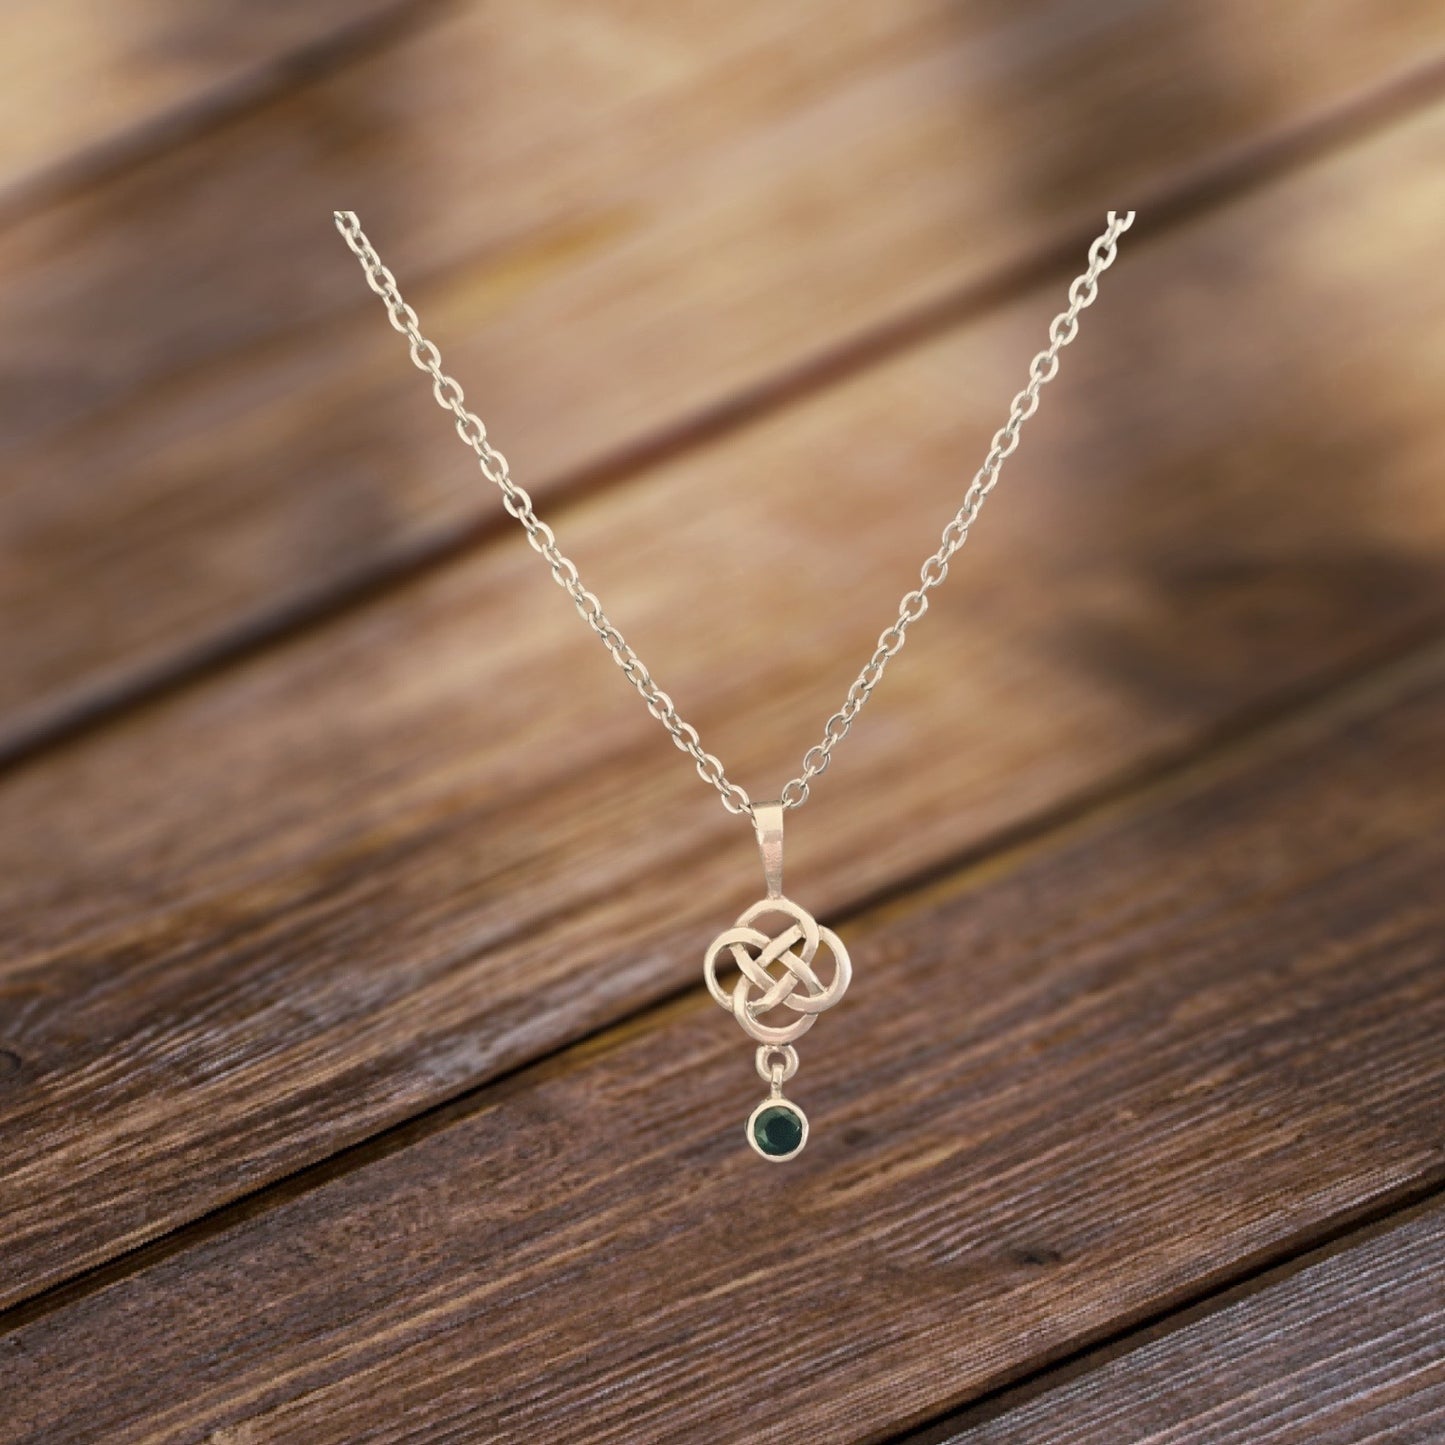 925 Sterling Silver Celtic Flower Knot with Emerald Green CZ Pendant + Chain